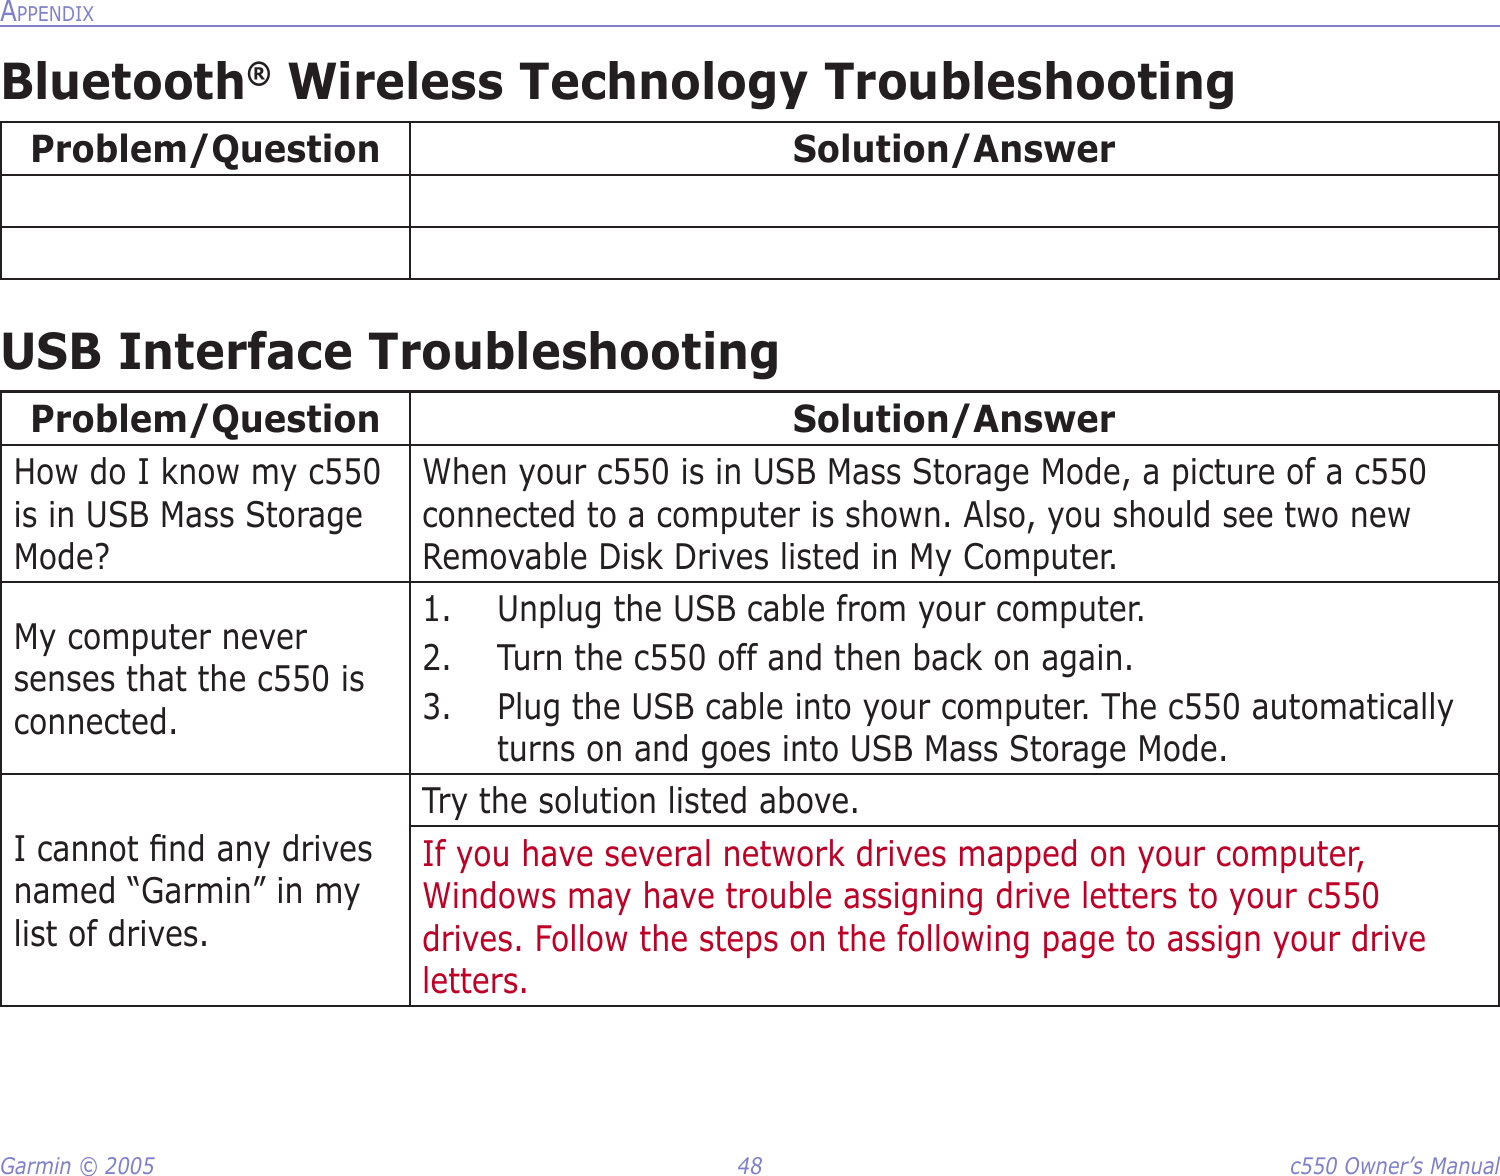 Garmin © 2005  48  c550 Owner’s ManualAPPENDIXBluetooth® Wireless Technology TroubleshootingProblem/Question Solution/AnswerUSB Interface TroubleshootingProblem/Question Solution/AnswerHow do I know my c550 is in USB Mass Storage Mode?When your c550 is in USB Mass Storage Mode, a picture of a c550 connected to a computer is shown. Also, you should see two new Removable Disk Drives listed in My Computer. My computer never senses that the c550 is connected.1.  Unplug the USB cable from your computer. 2.  Turn the c550 off and then back on again. 3.  Plug the USB cable into your computer. The c550 automatically turns on and goes into USB Mass Storage Mode. I cannot ﬁnd any drives named “Garmin” in my list of drives.Try the solution listed above. If you have several network drives mapped on your computer, Windows may have trouble assigning drive letters to your c550 drives. Follow the steps on the following page to assign your drive letters. 